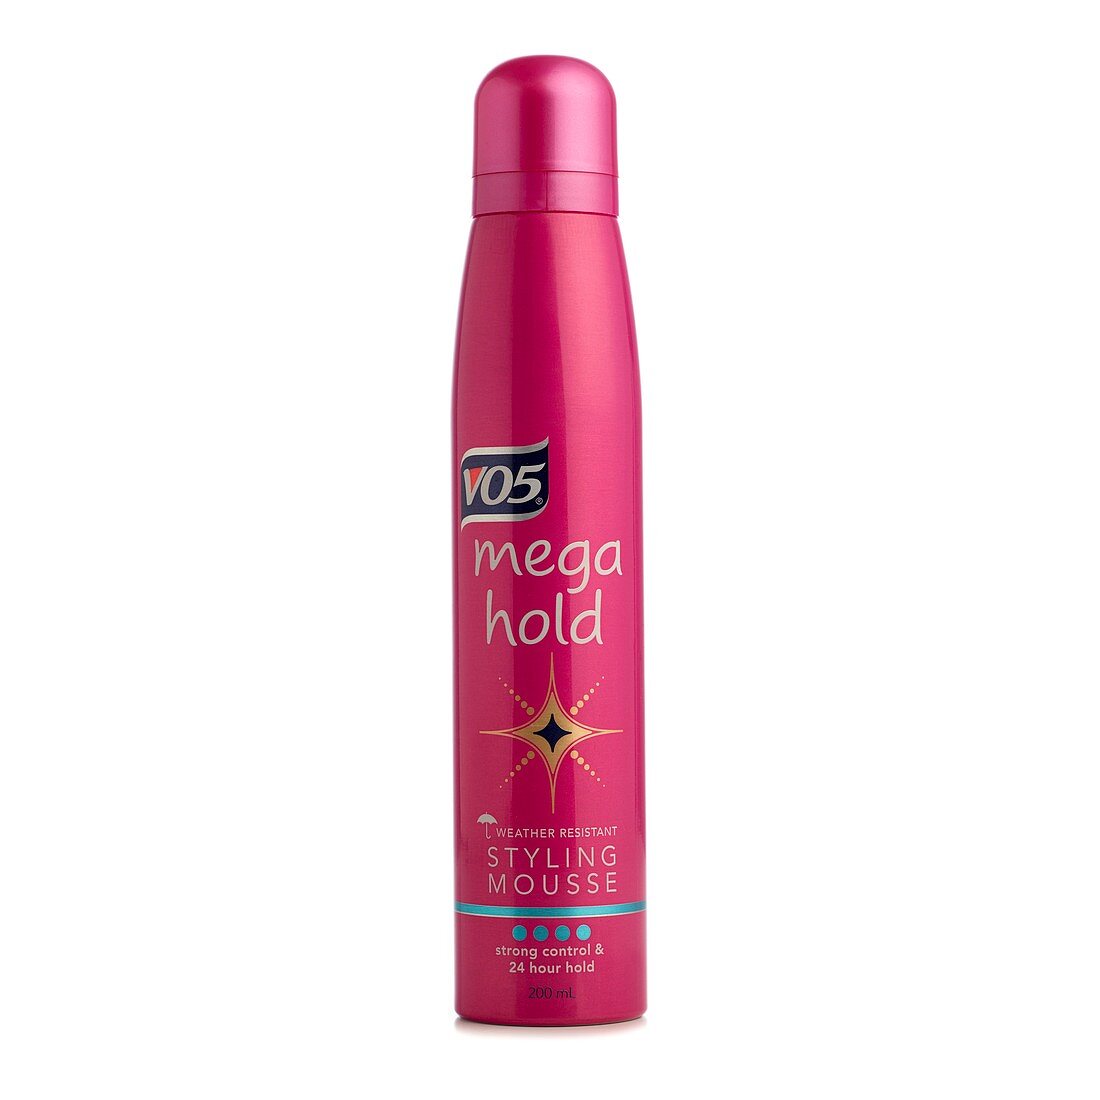 Can of hair mousse